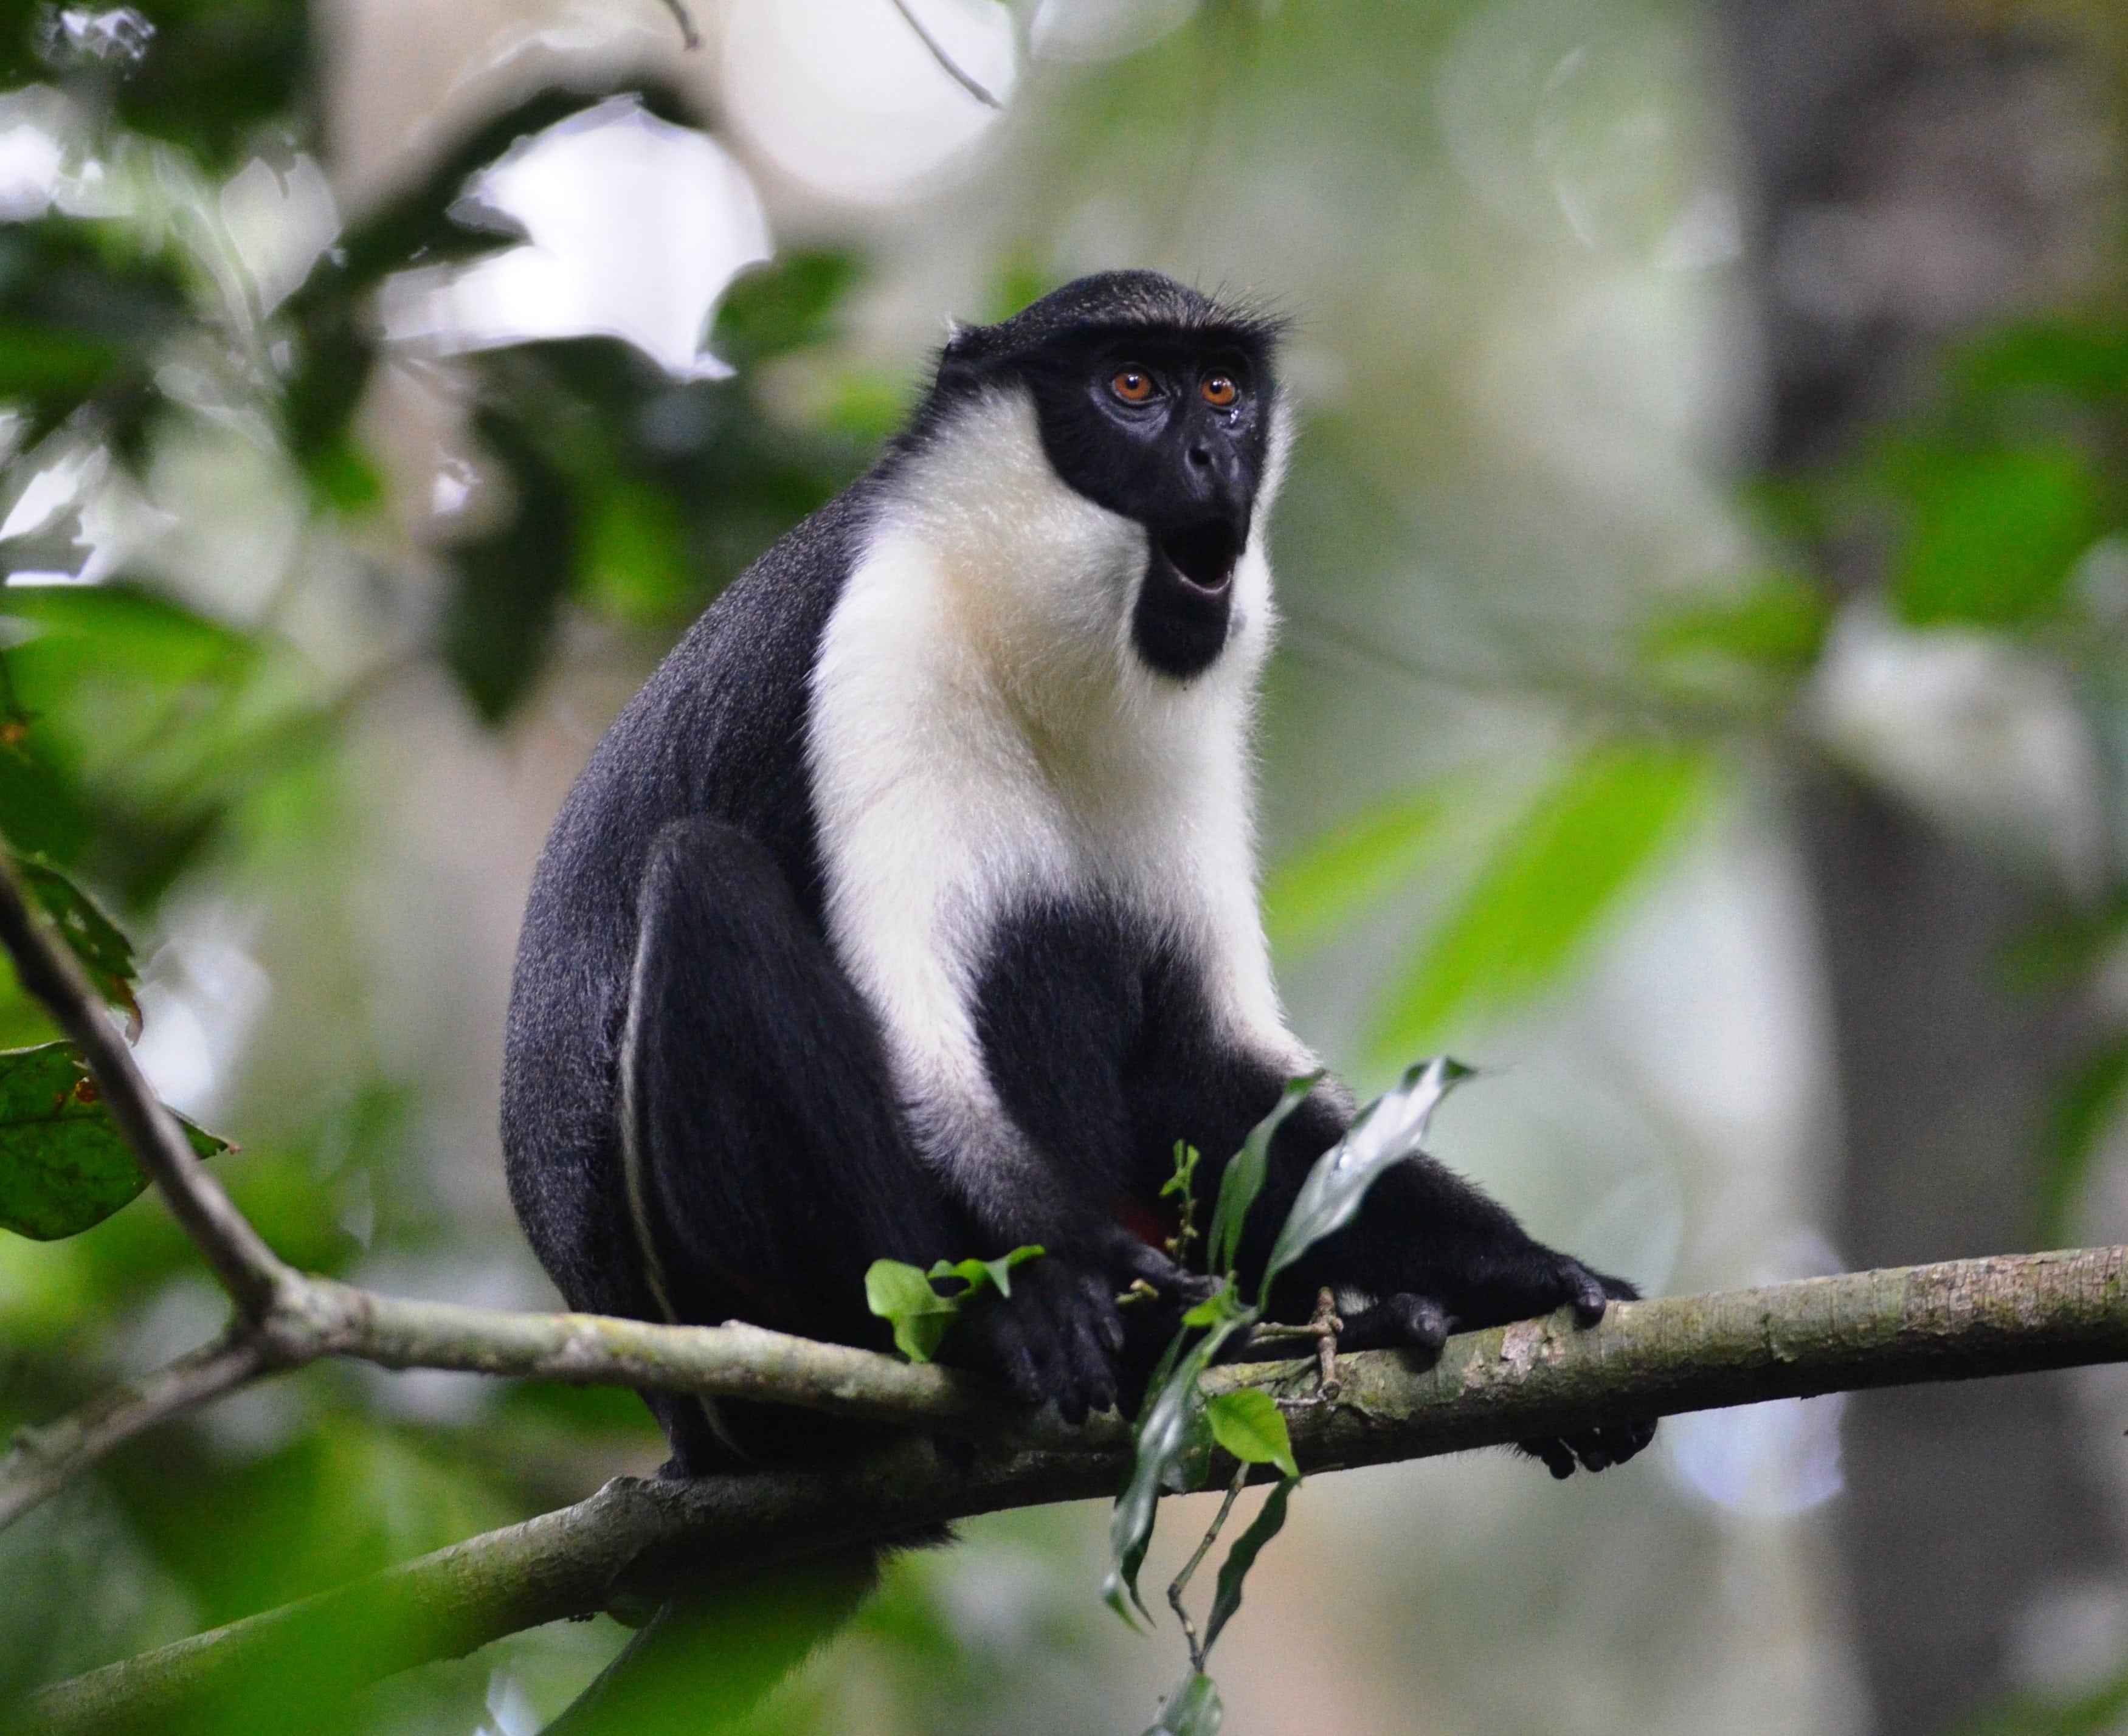 Photo of a black and white monkey sitting on a tree branch